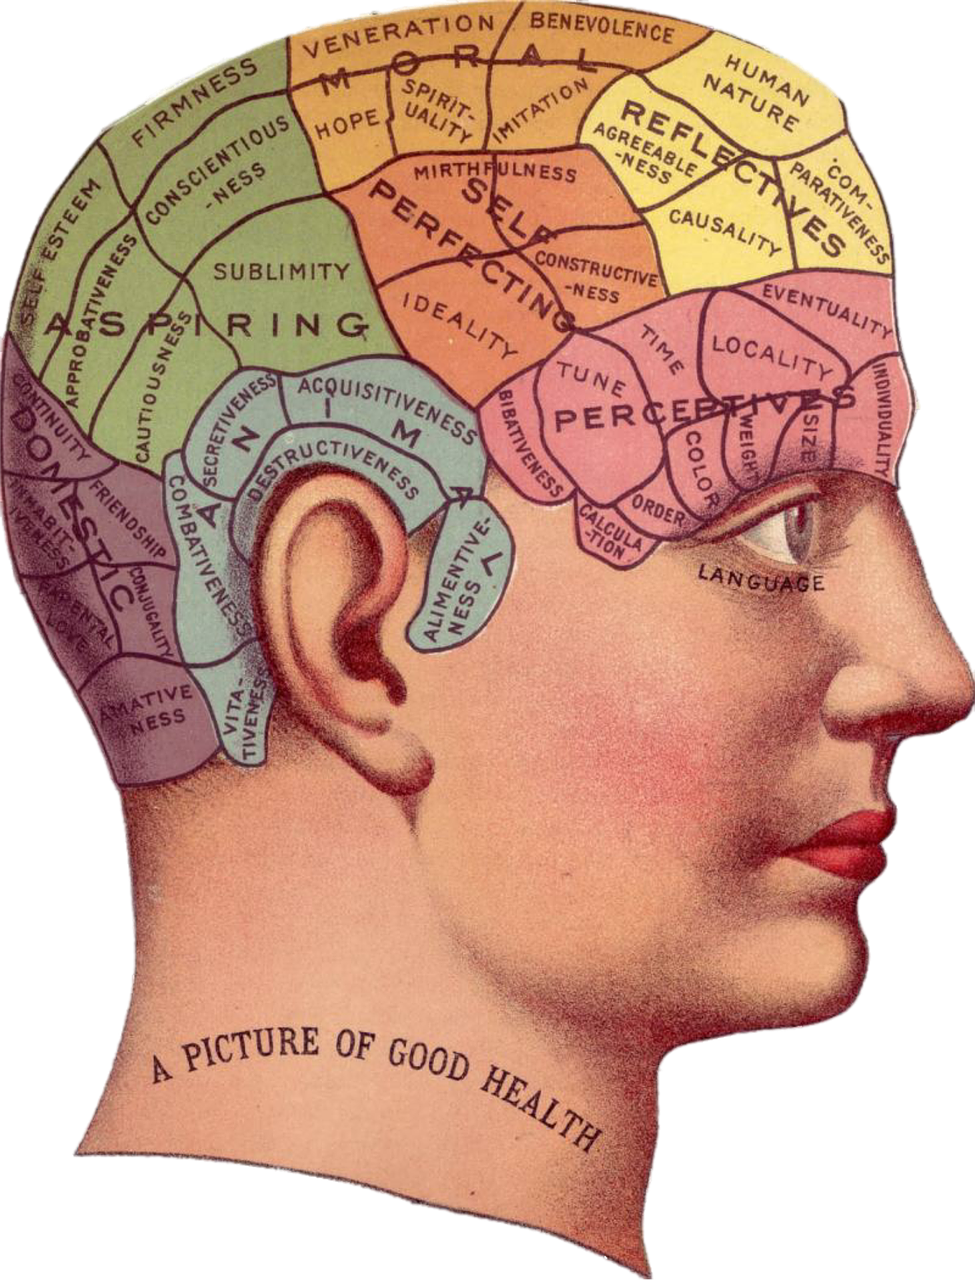 Vintage image of brain and head for blog by Wellspace on Mindfullness